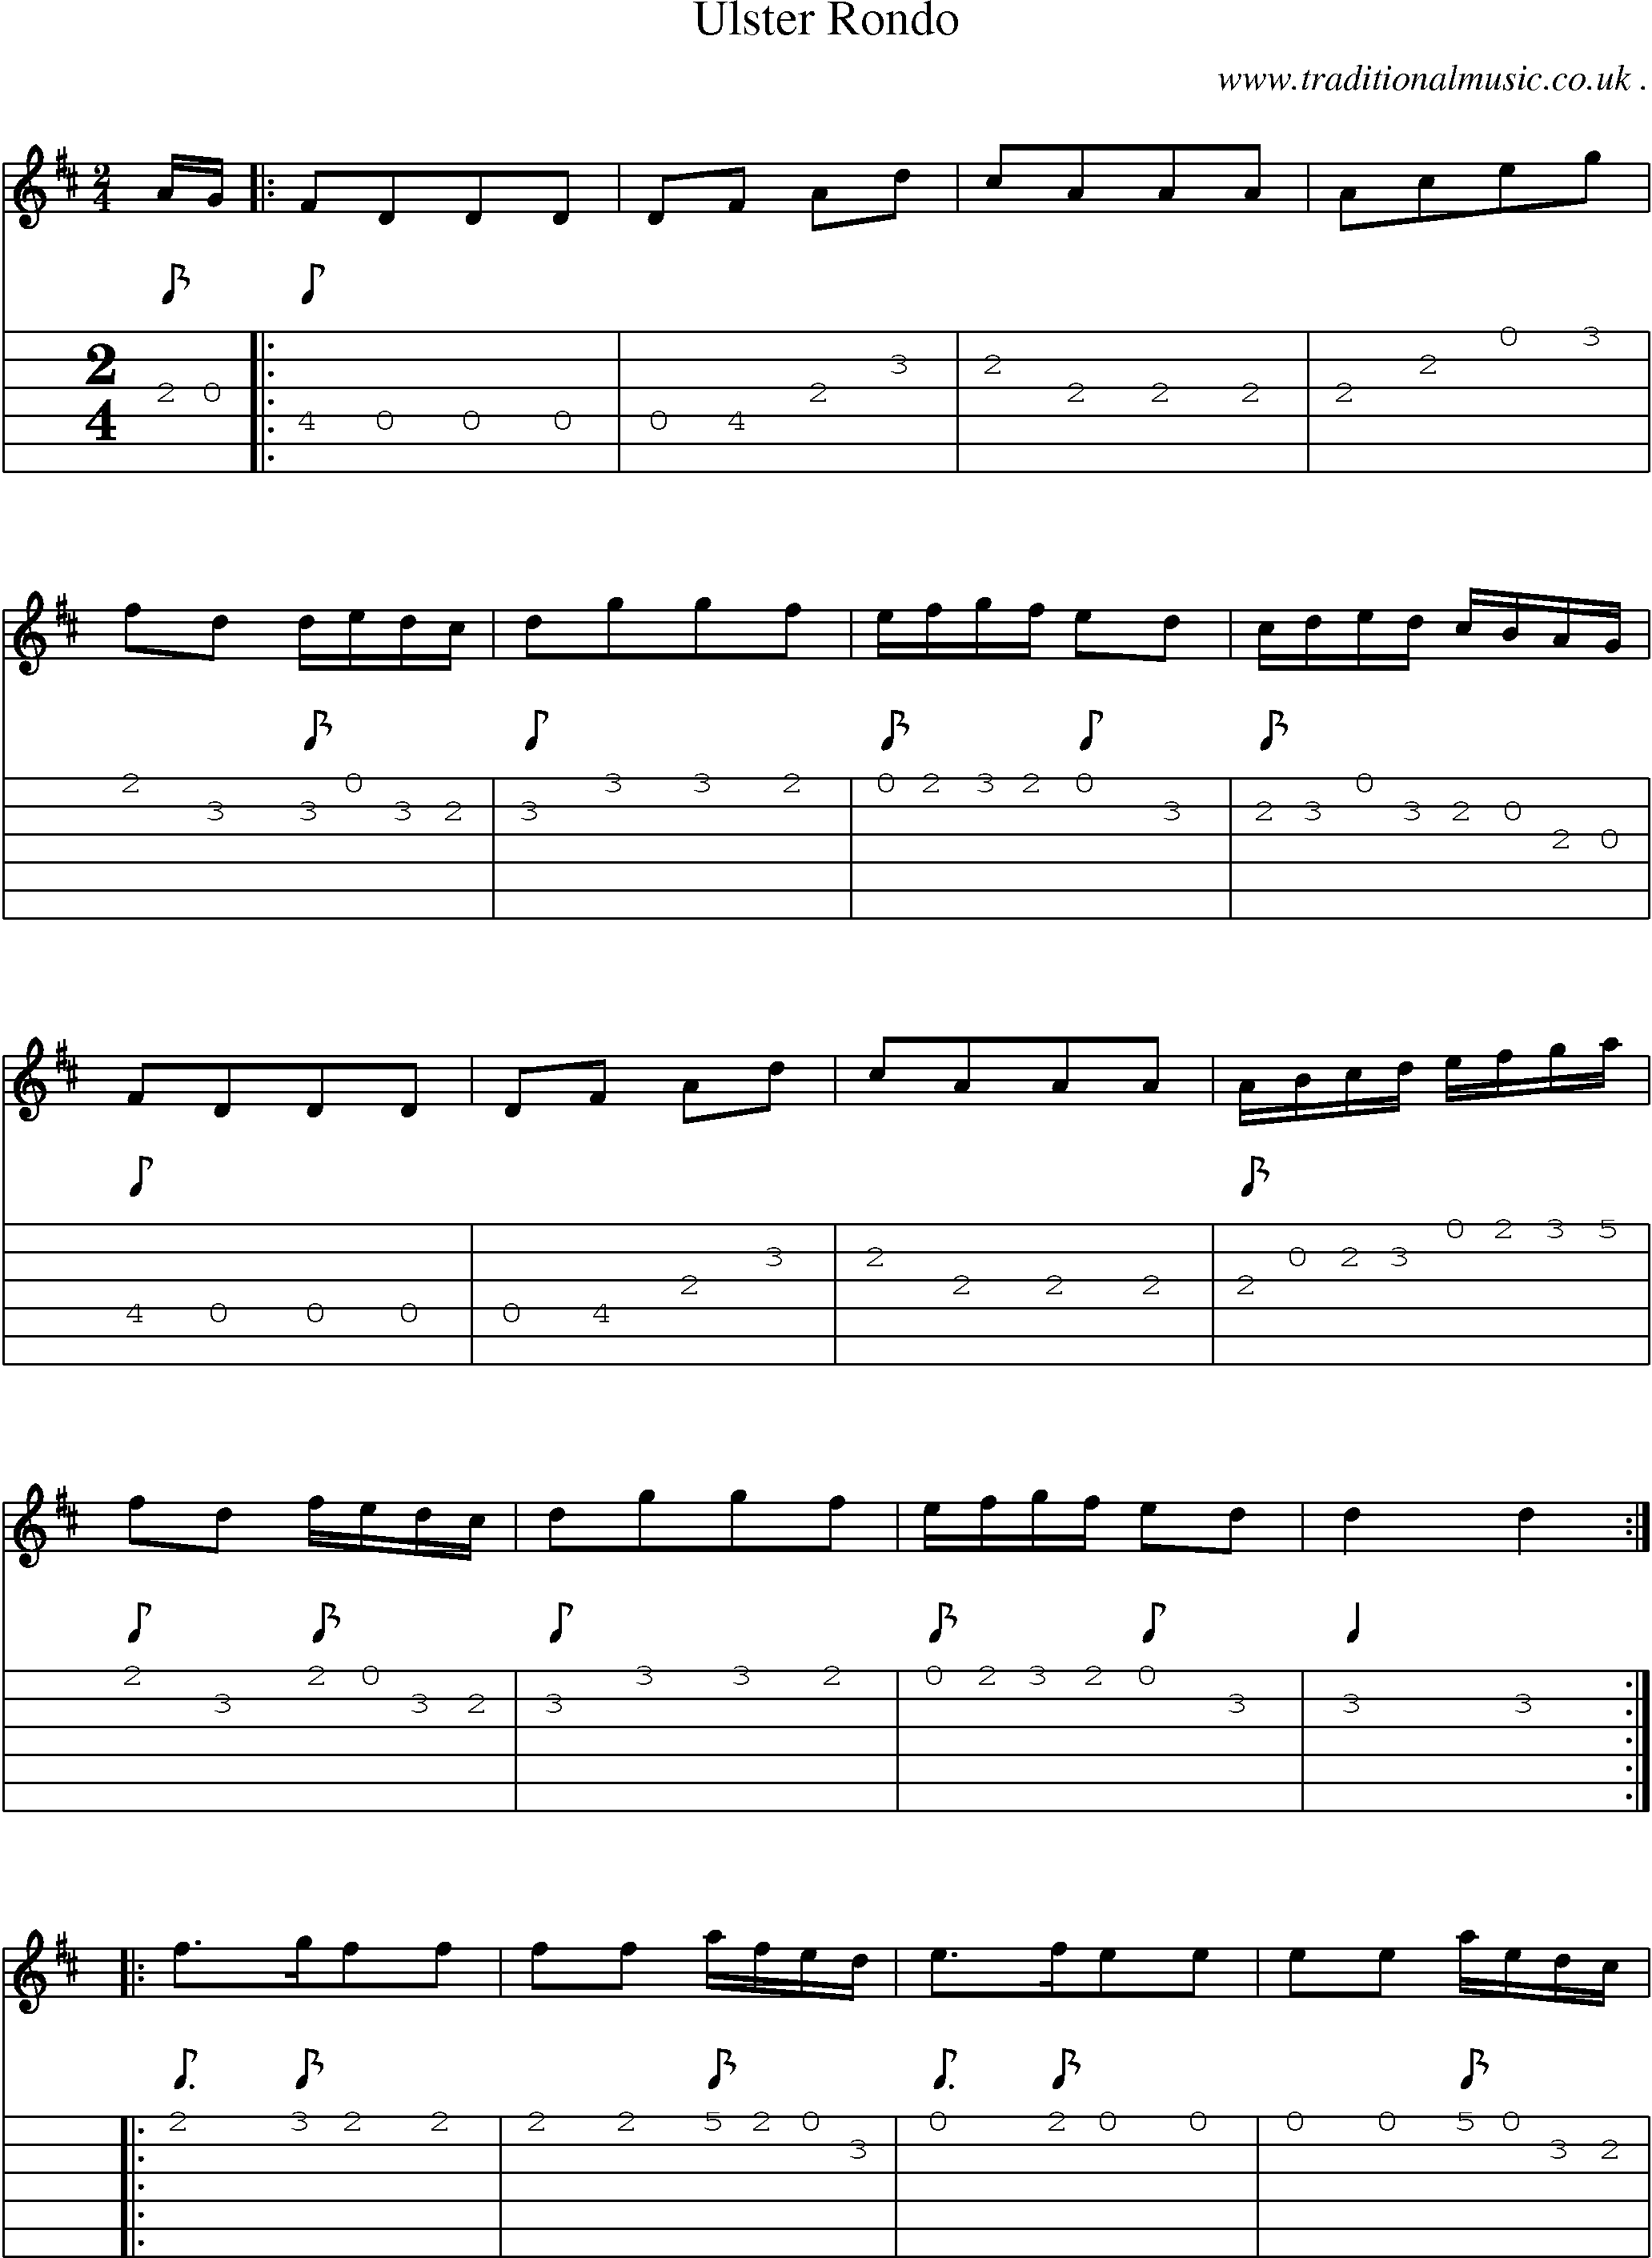 Sheet-Music and Guitar Tabs for Ulster Rondo